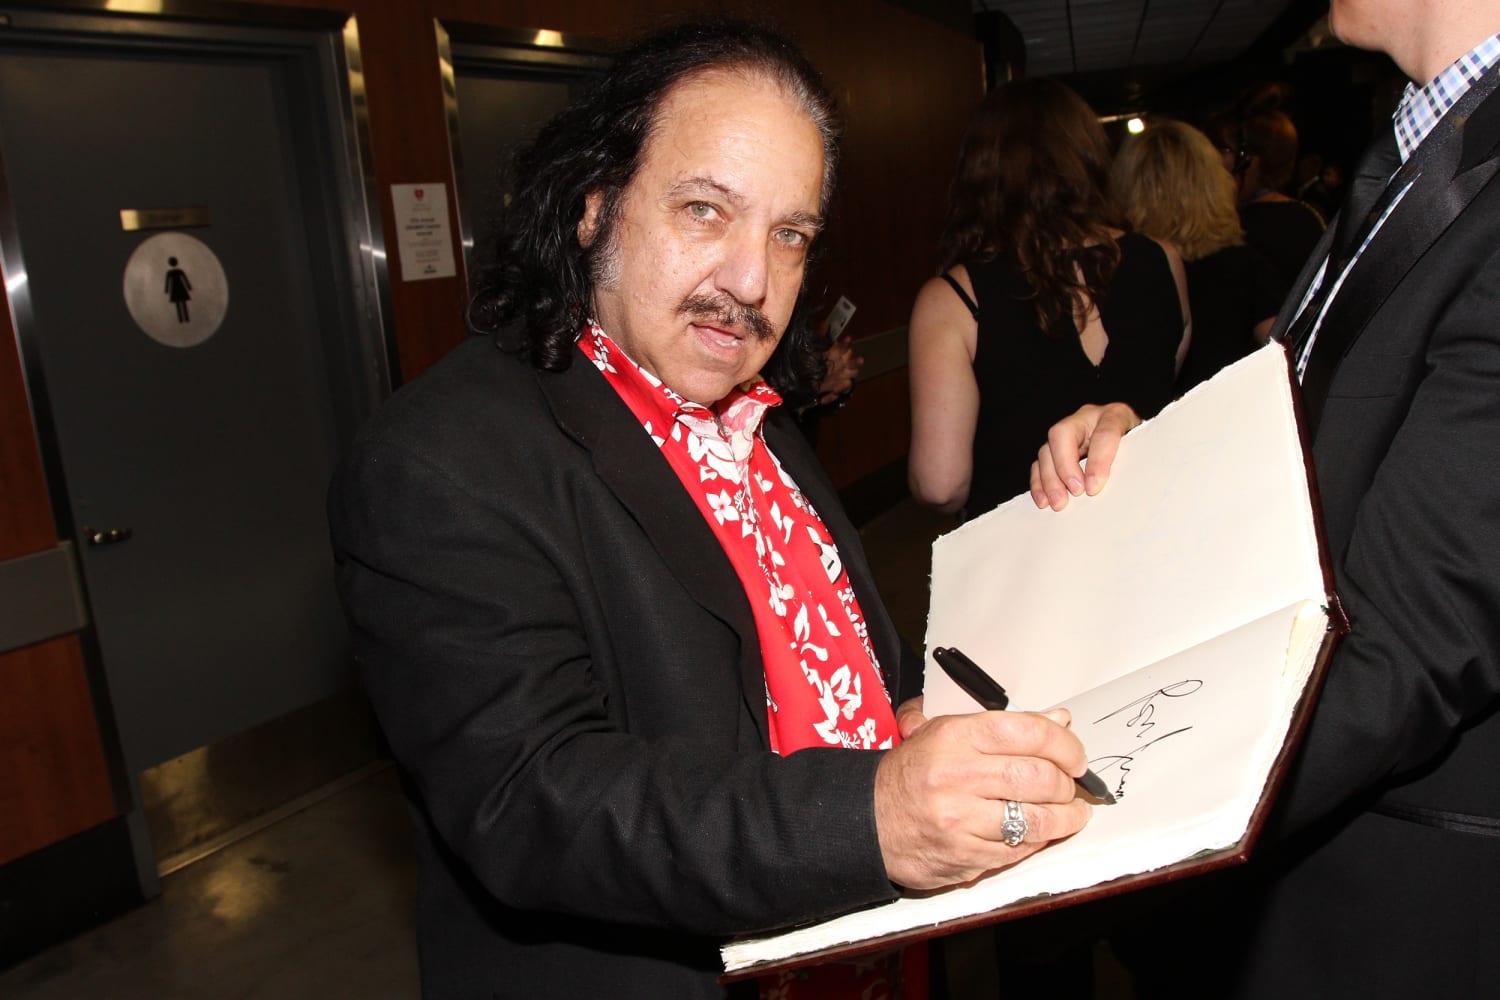 Xxx Video Rape Sex Girls - Porn actor Ron Jeremy charged with rape, sexual assault